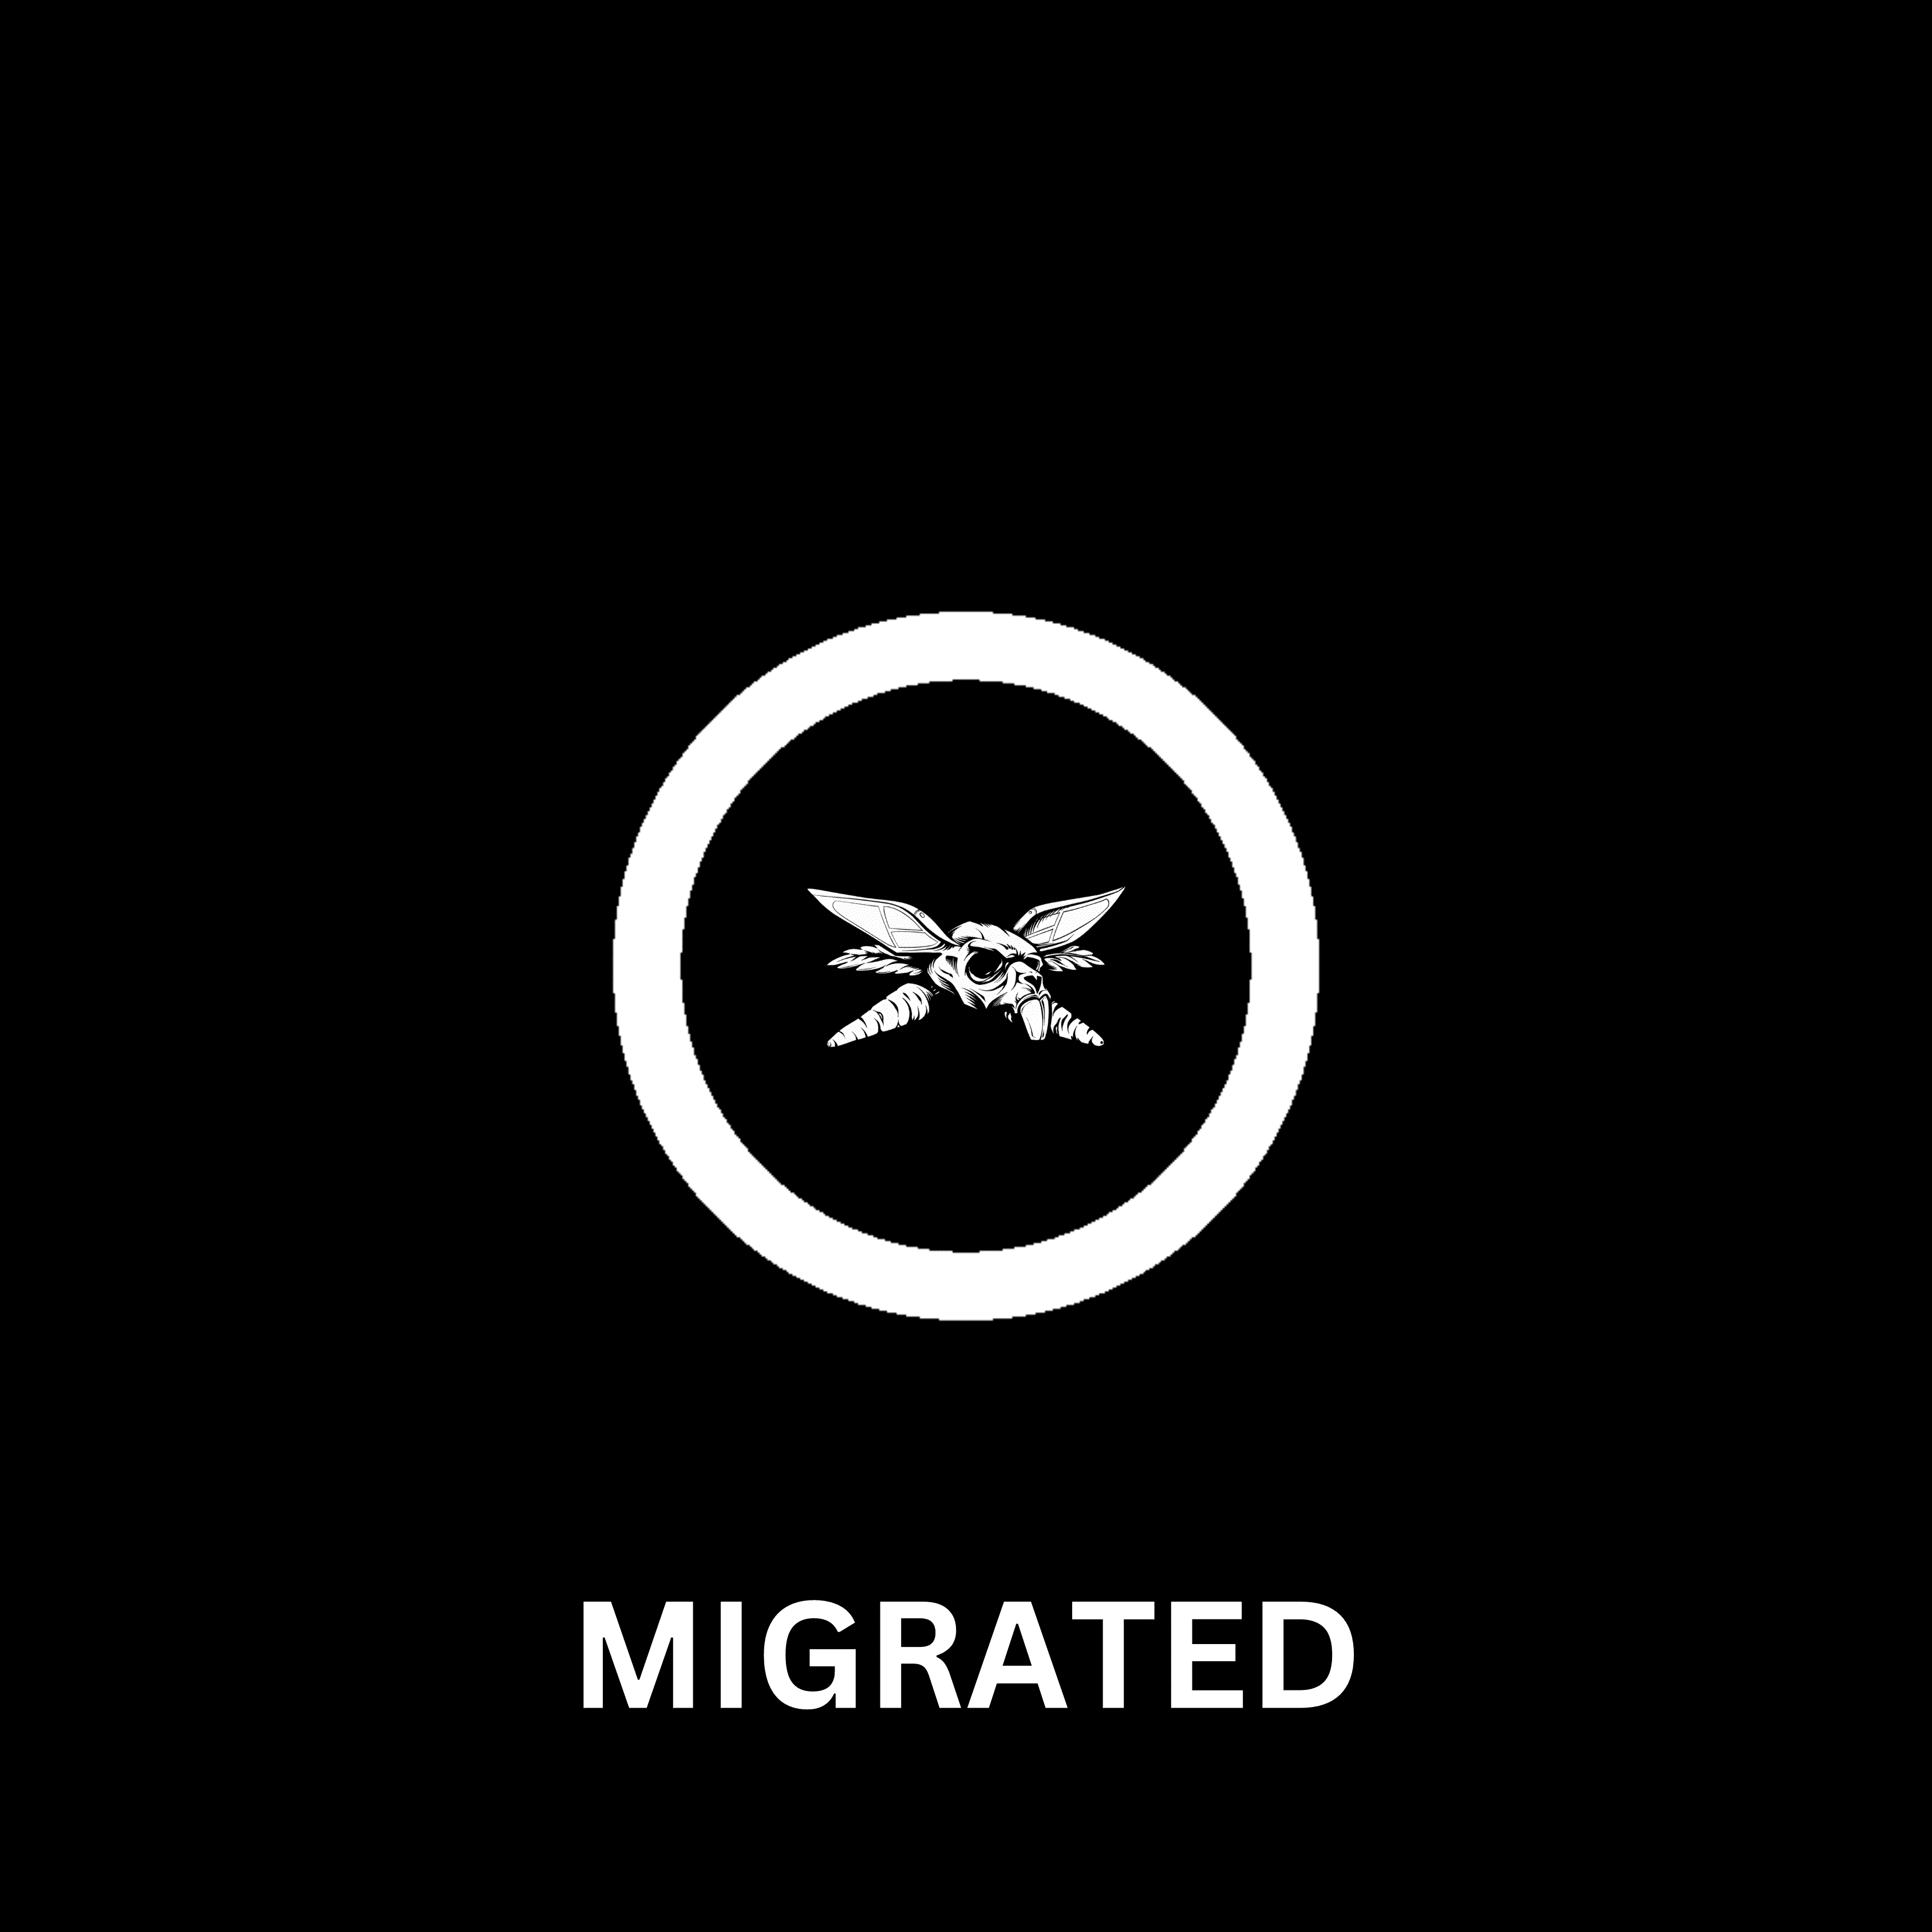 Migrated